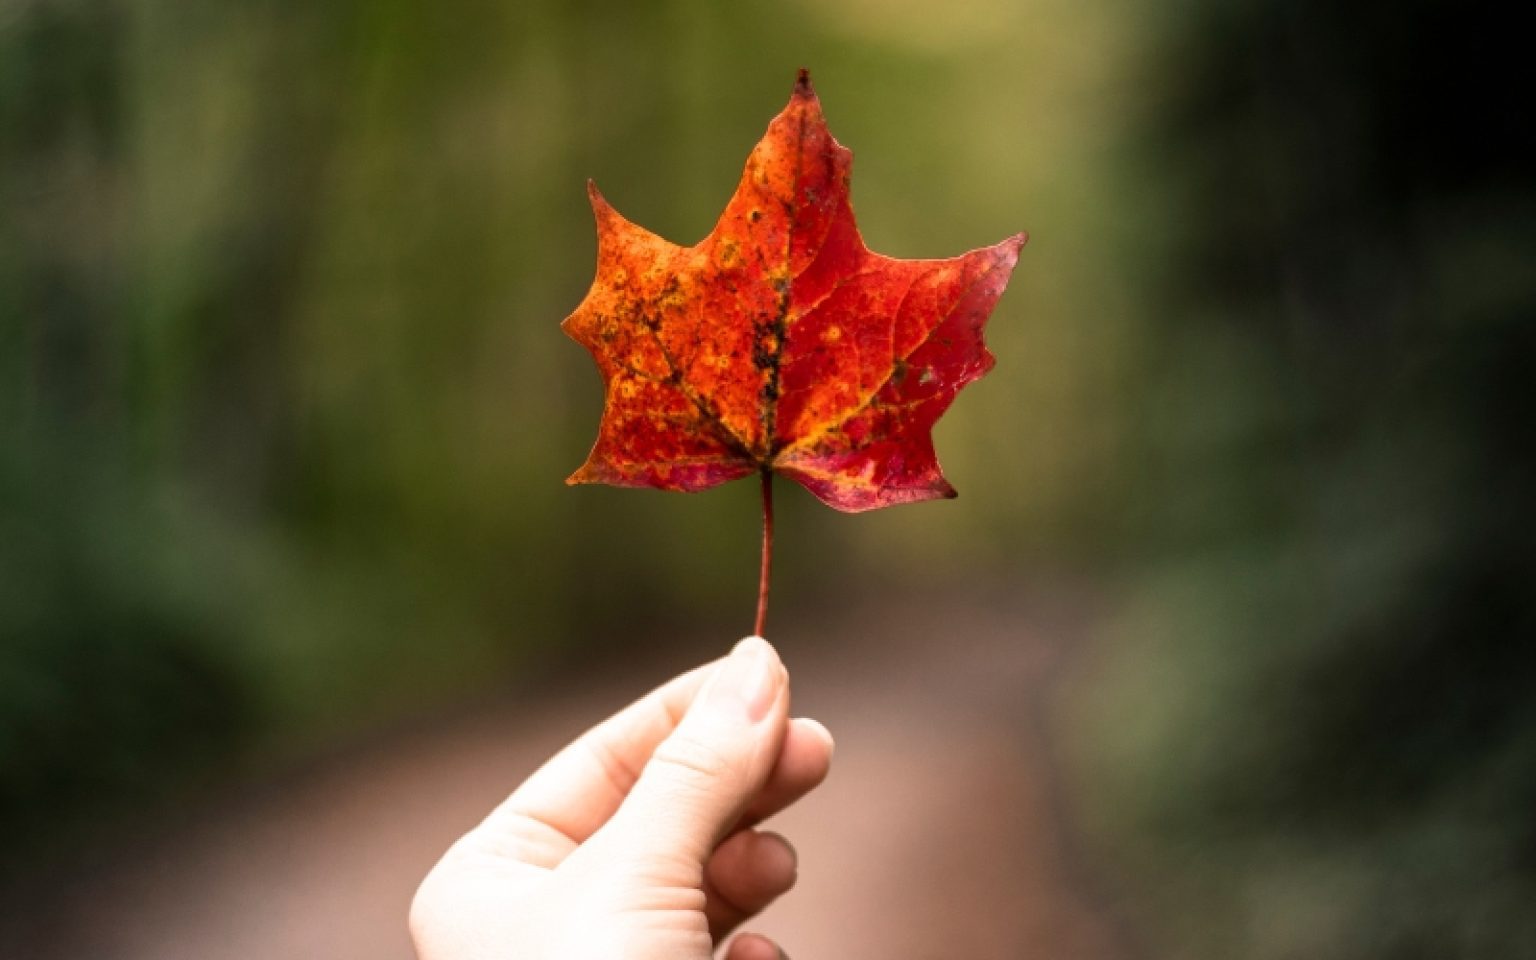 spiritual-meaning-of-falling-leaves-embrace-change